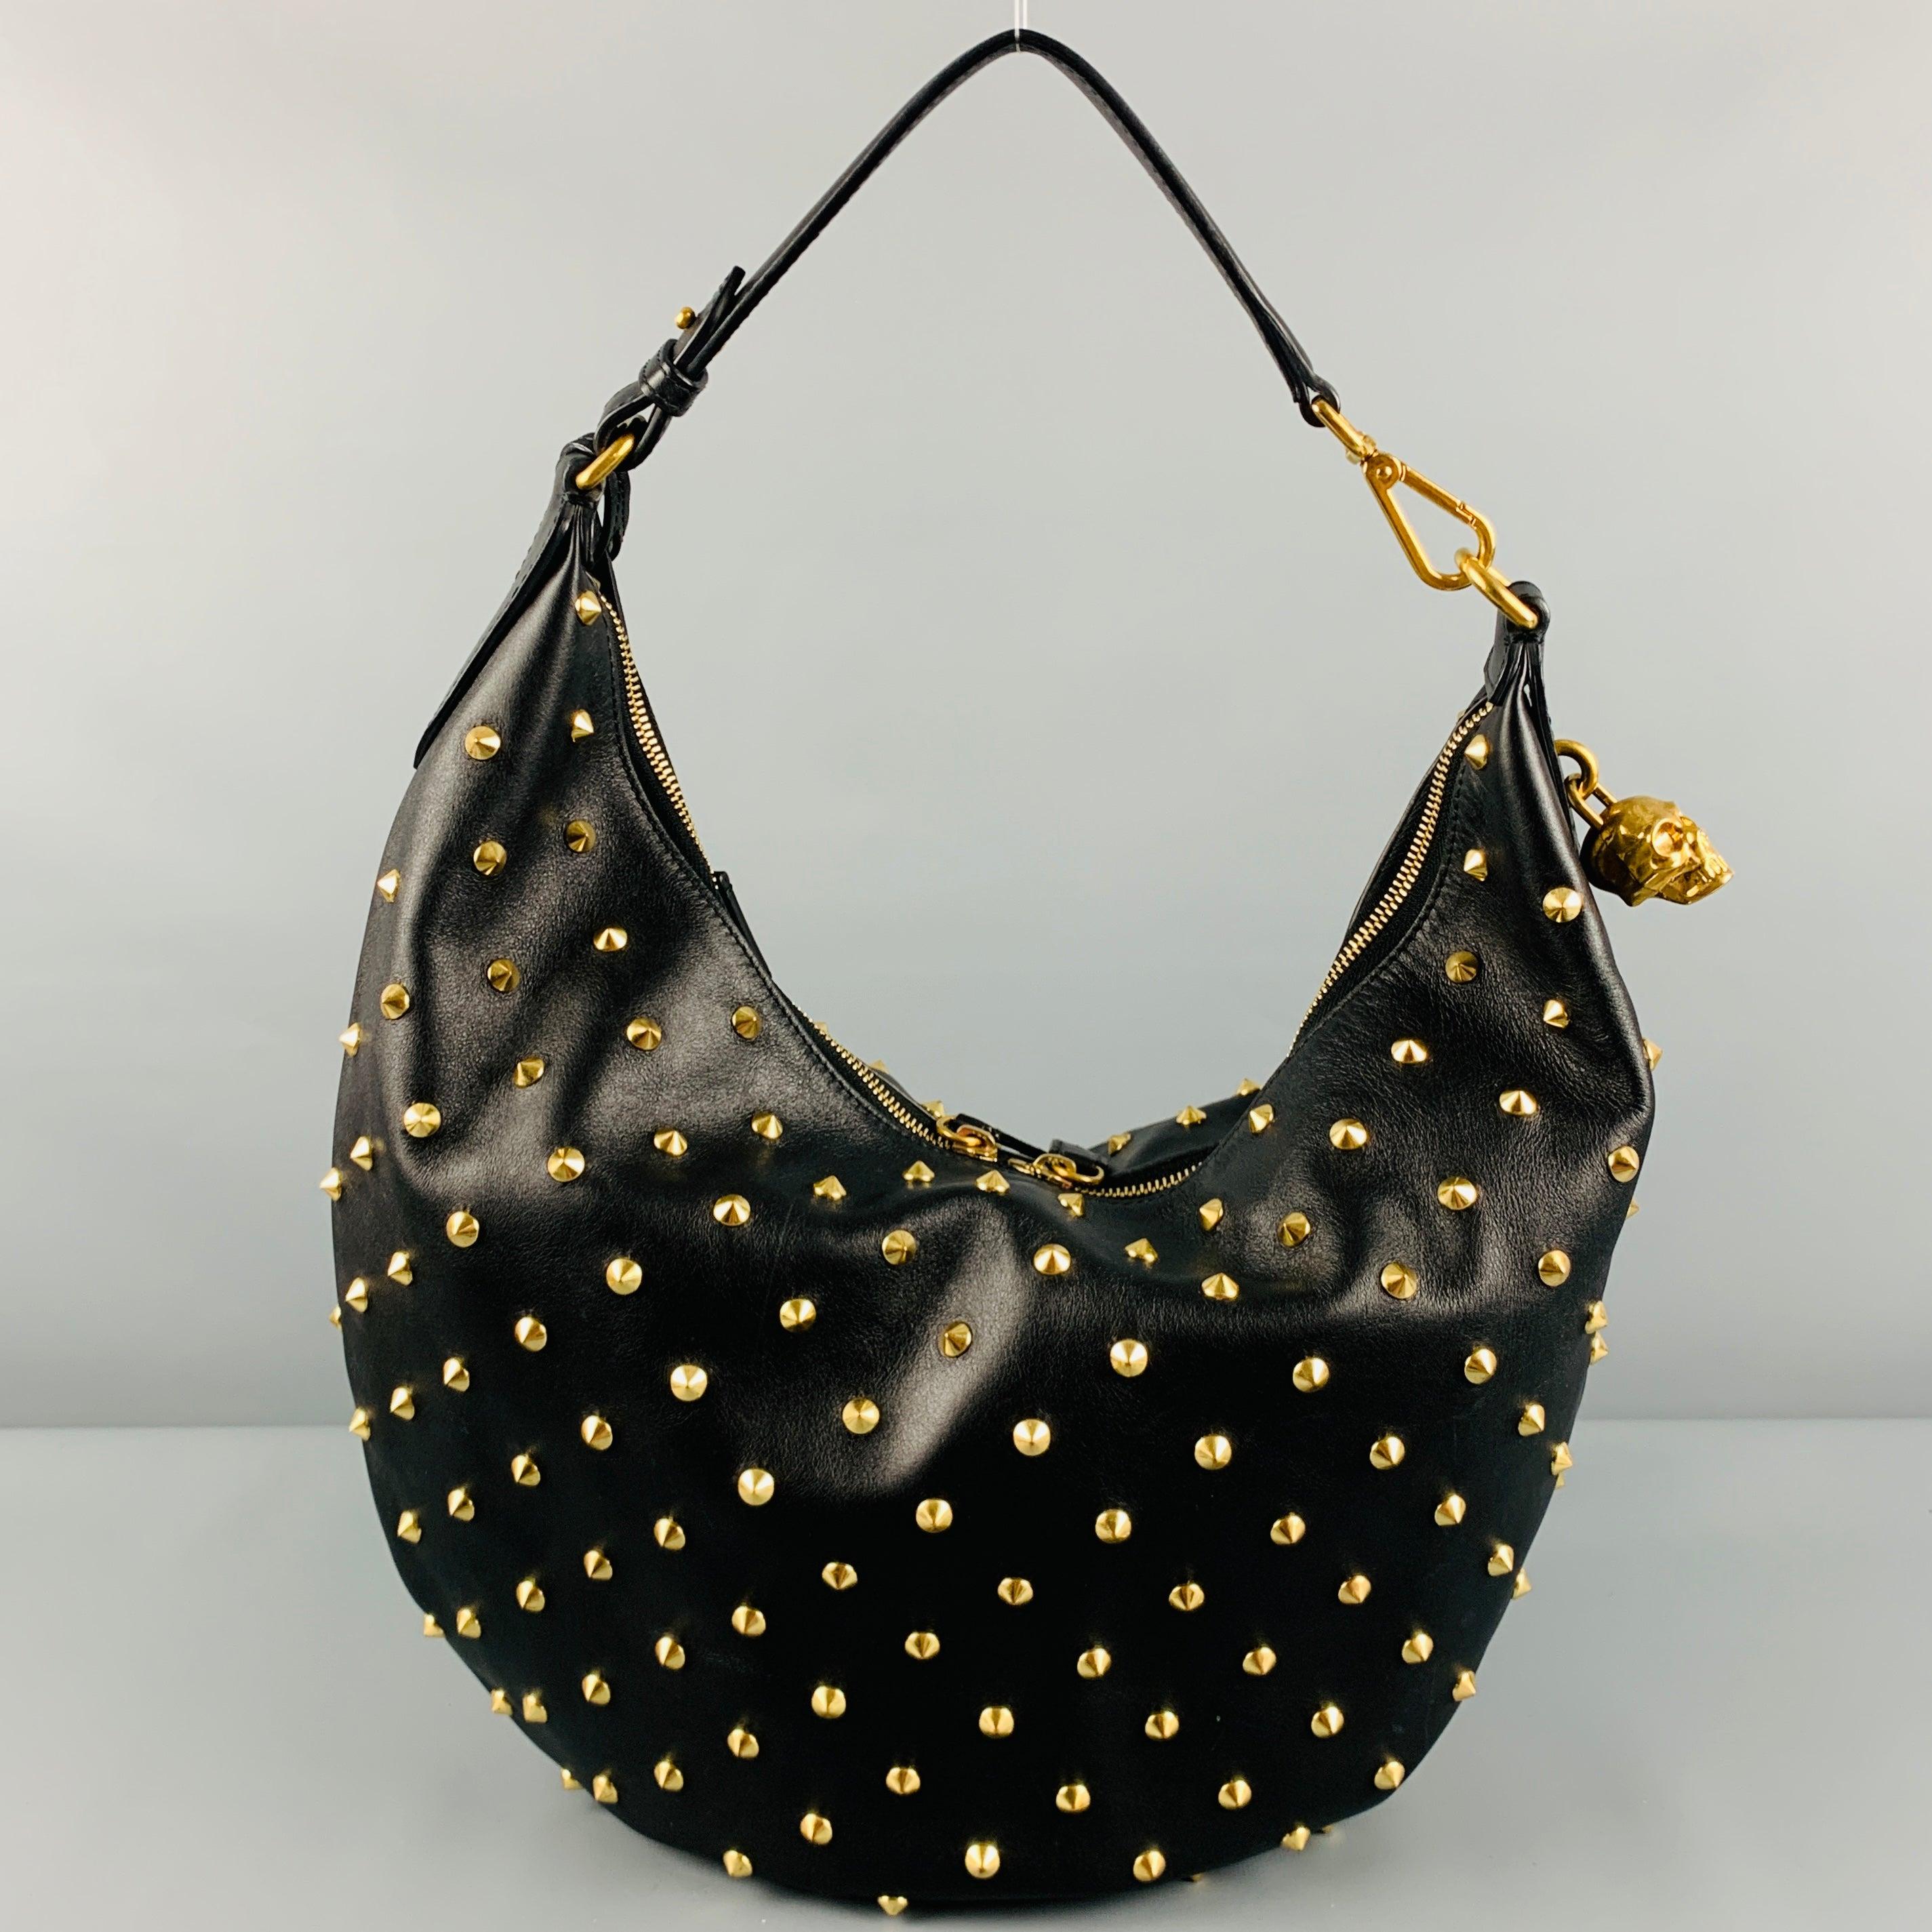 ALEXANDER MCQUEEN Black Gold Studded Leather Hobo Handbag In Good Condition For Sale In San Francisco, CA